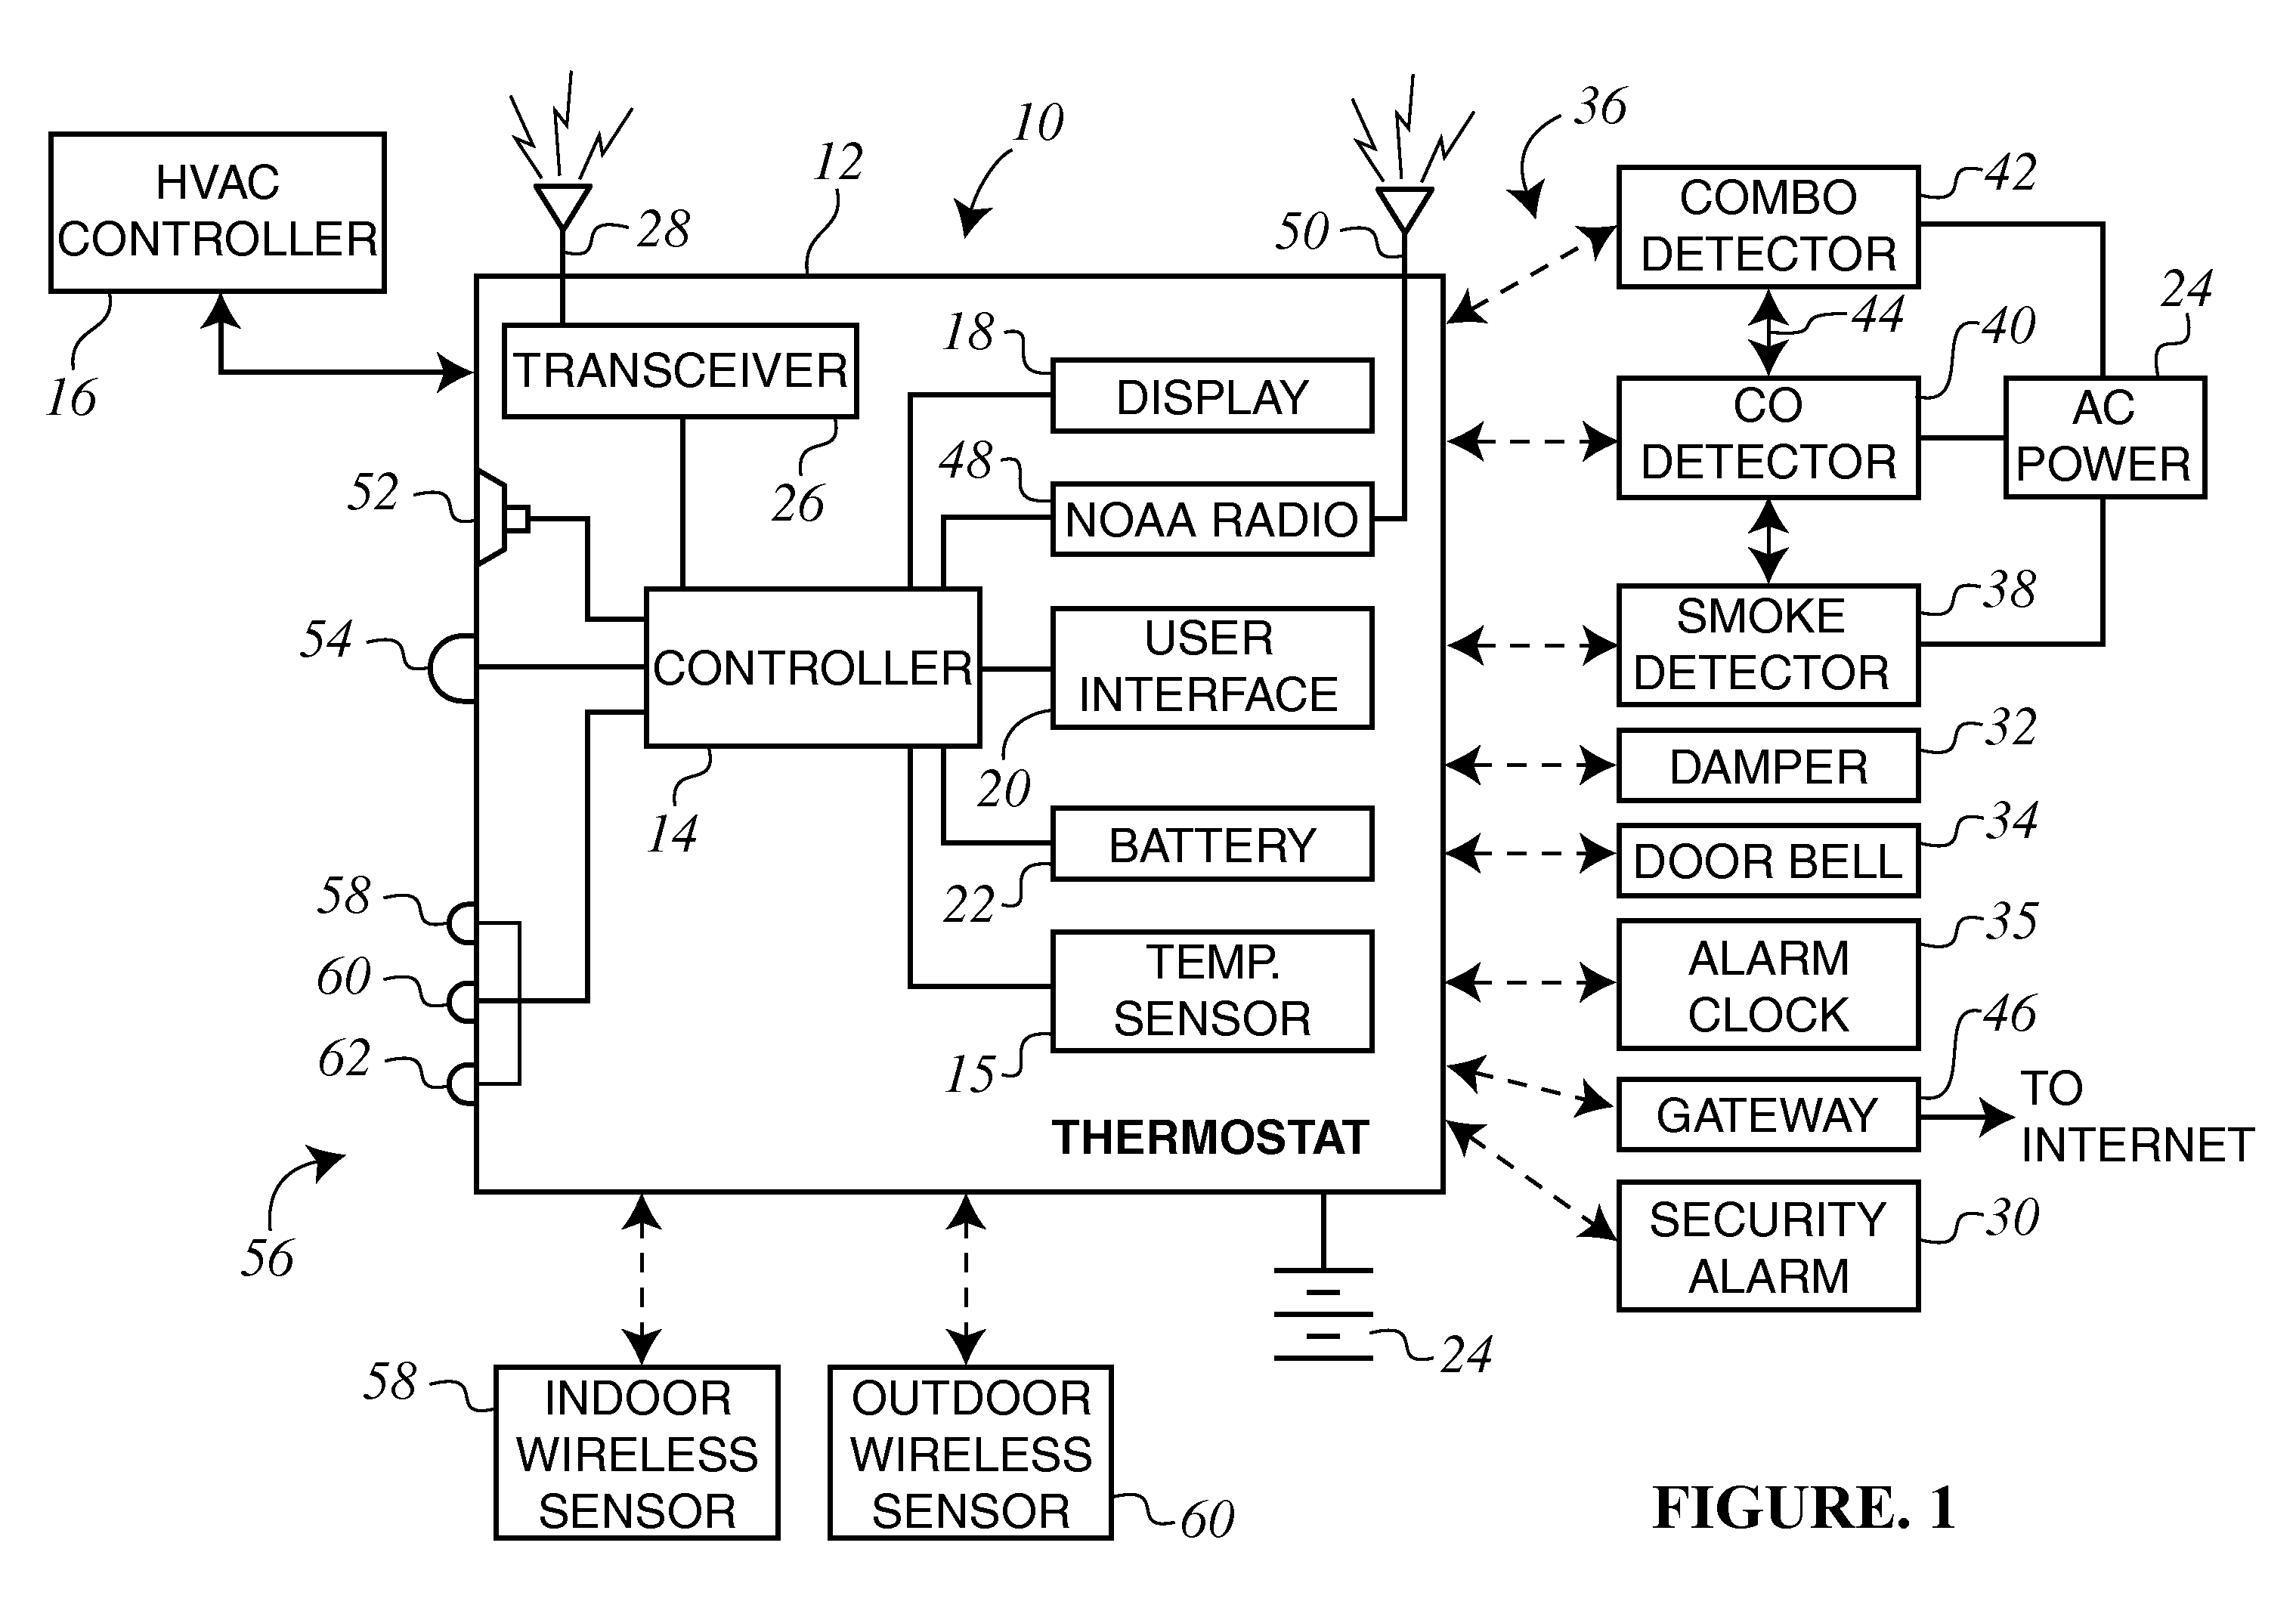 Combination thermostat and warning device with remote sensor monitoring